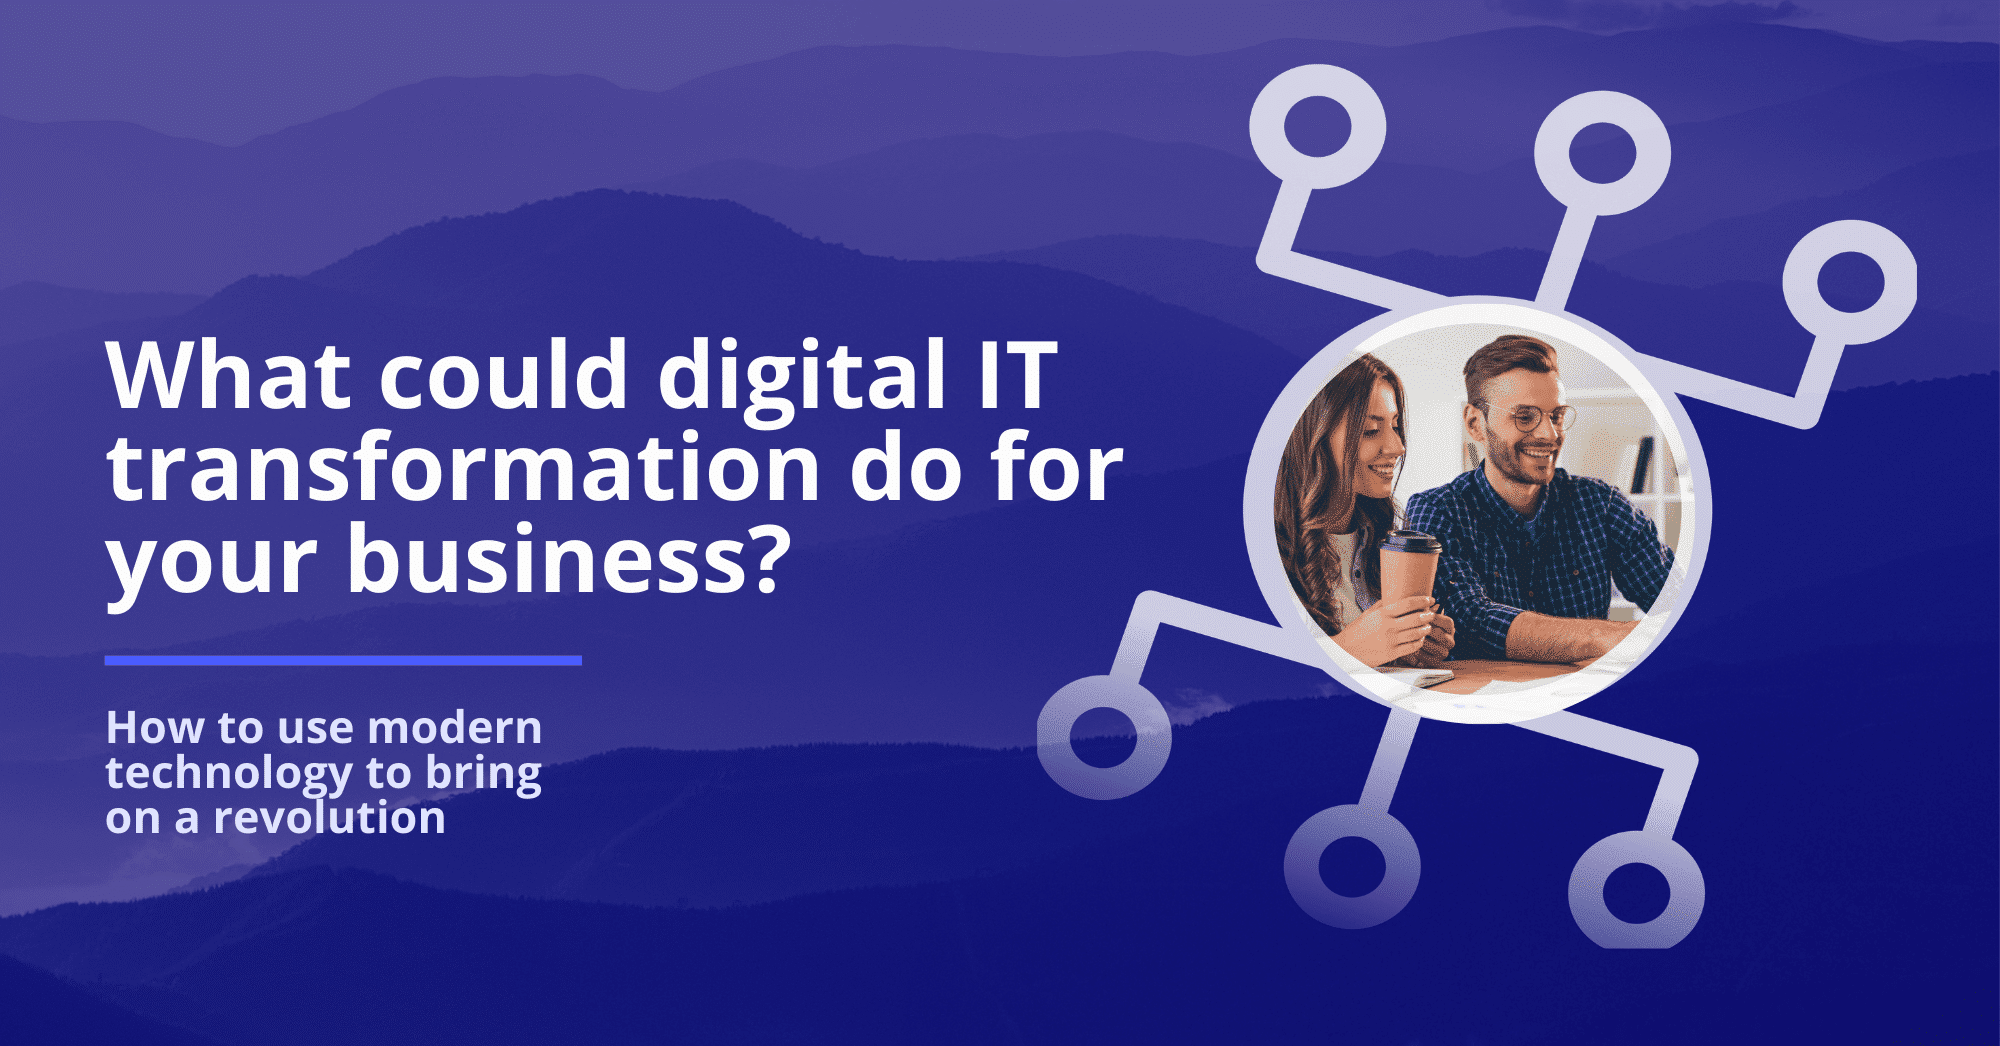 What could digital IT transformation do for your business - Blog image